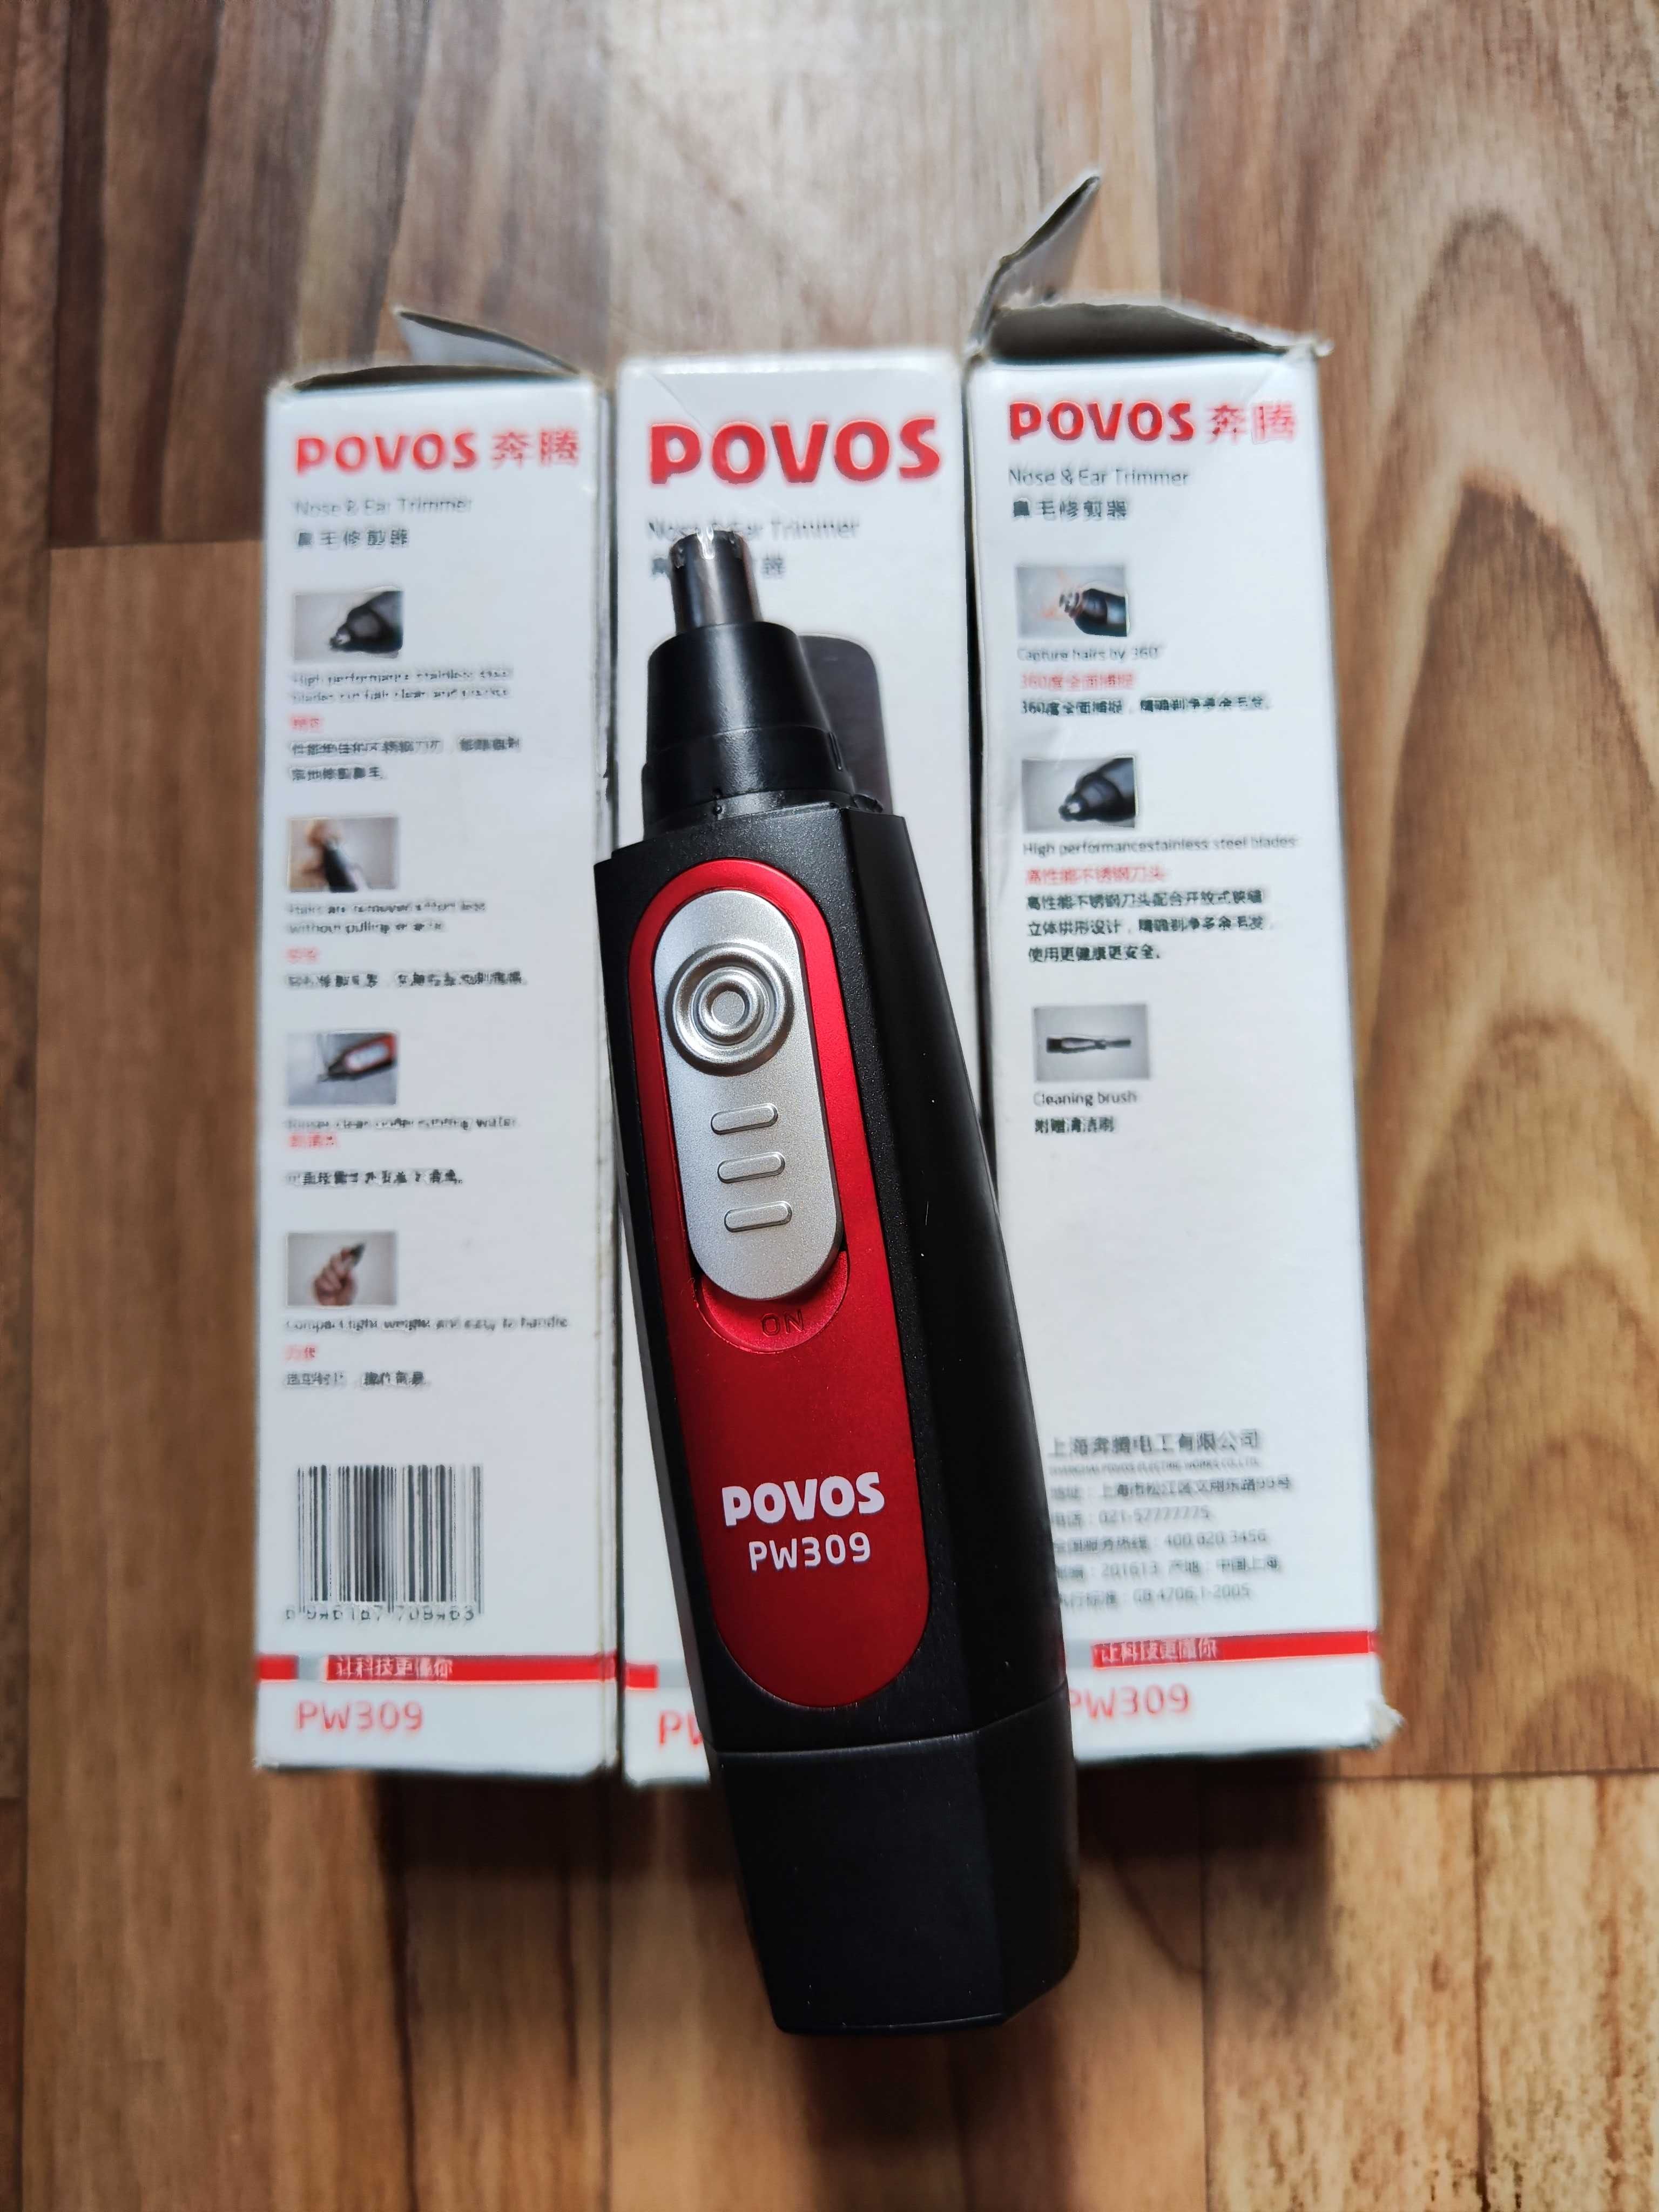 Тример Povos PW309 Nose & Ear Trimmer